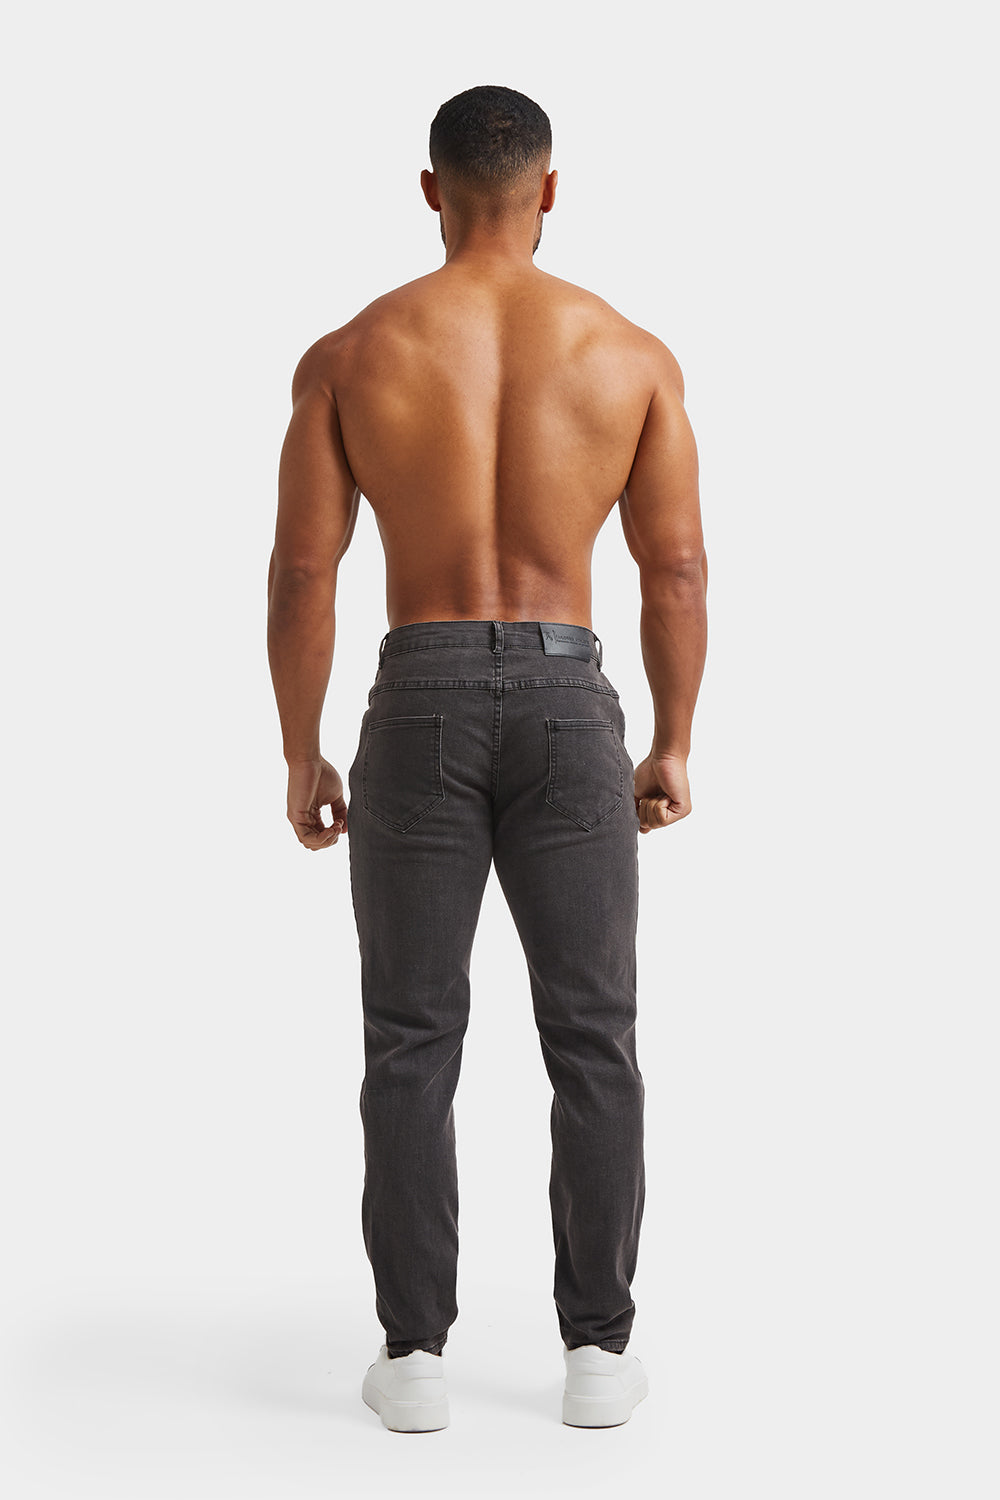 in Athletic - Grey Fit ATHLETE USA - TAILORED Jeans Dark